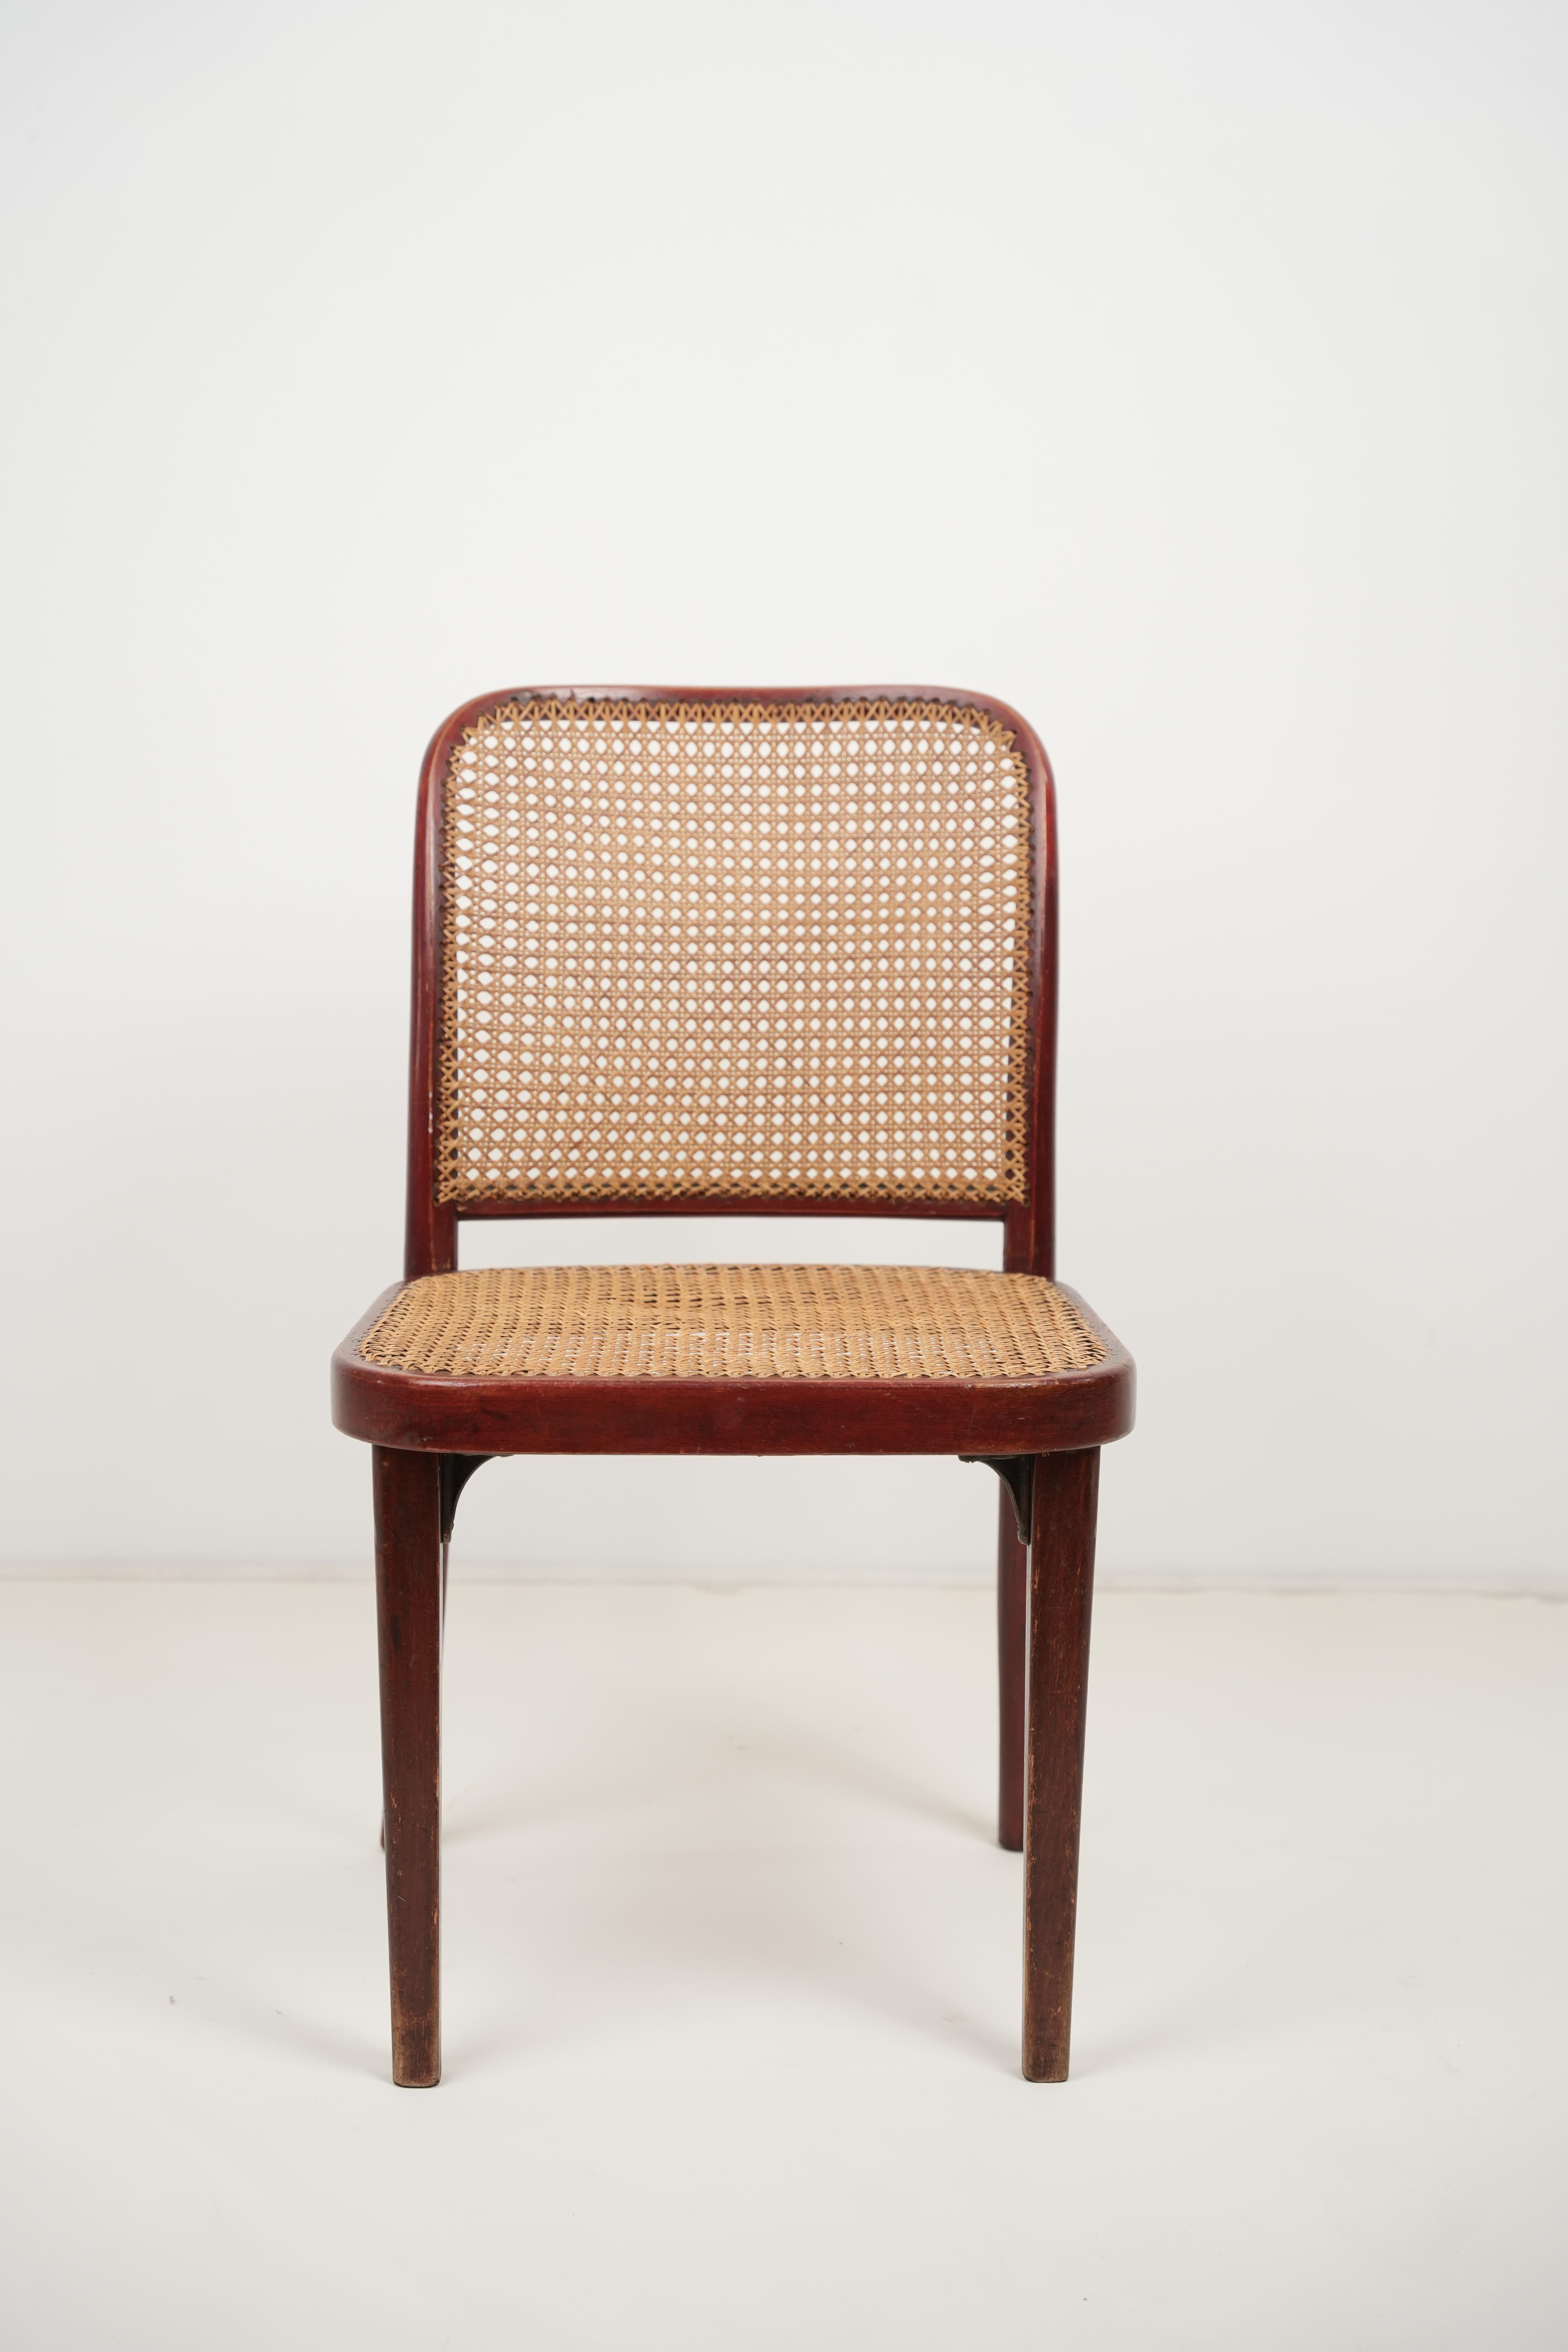 Art Deco A 811 Chair By Josef Hoffmann or Josef Frank for Thonet 1920s For Sale